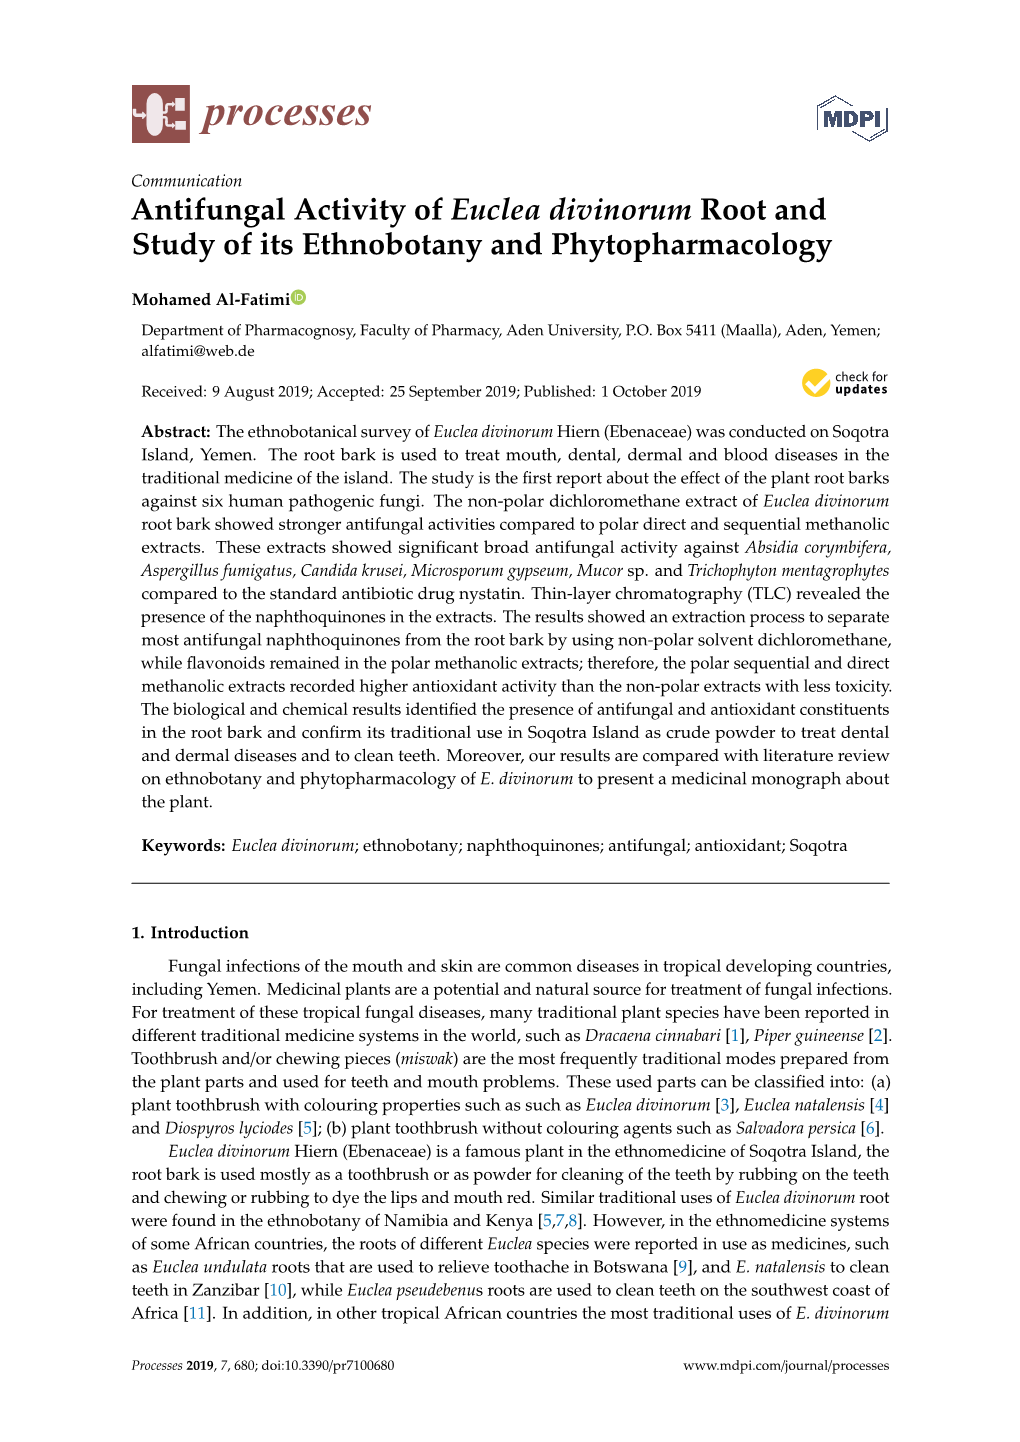 Antifungal Activity of Euclea Divinorum Root and Study of Its Ethnobotany and Phytopharmacology